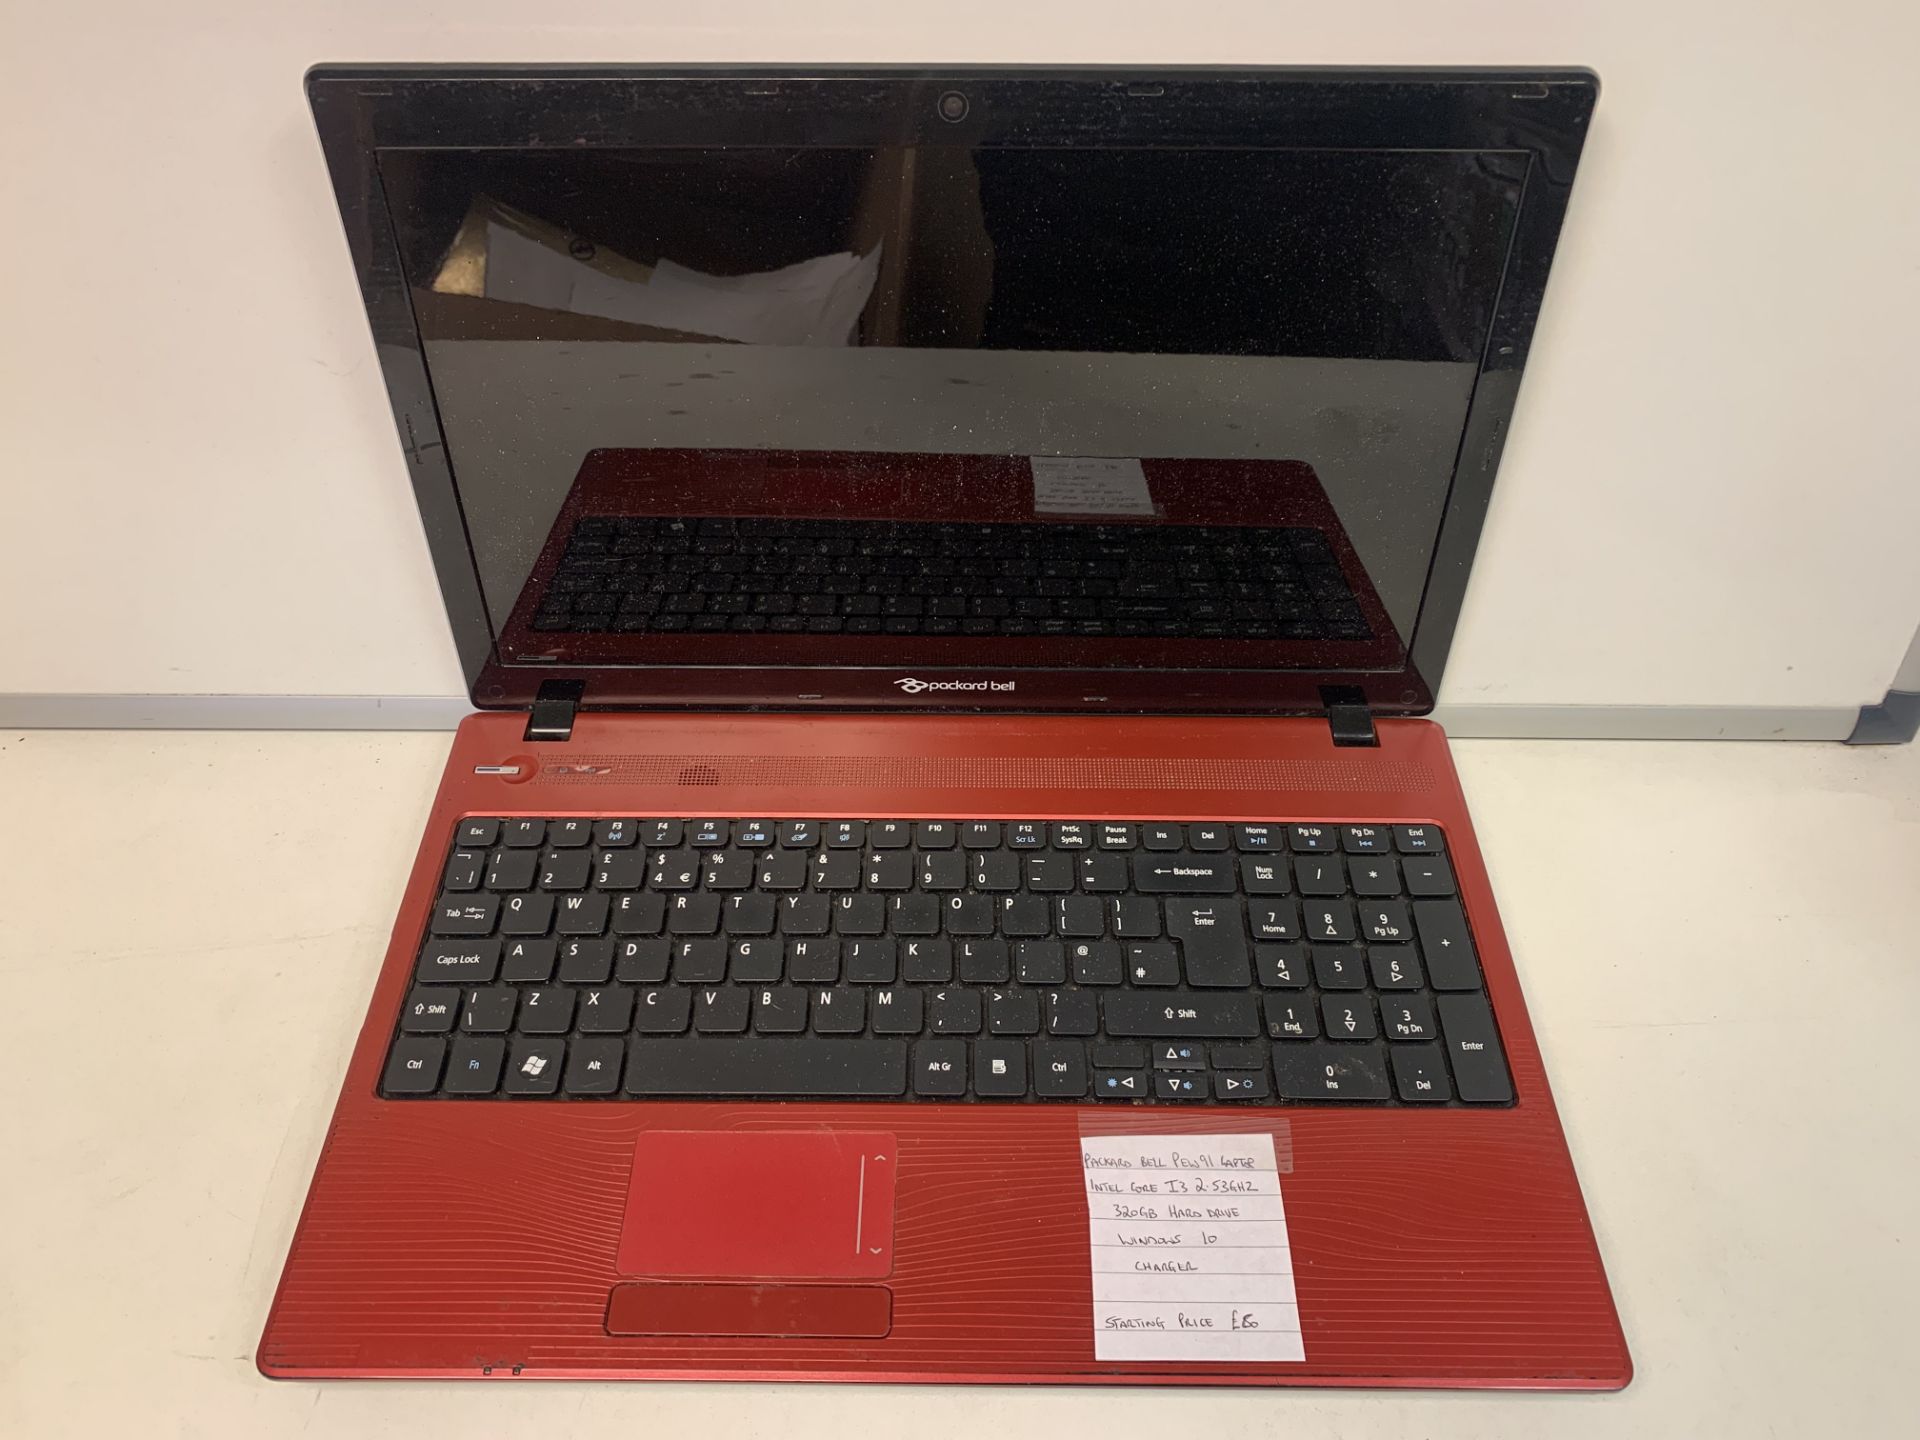 PACKARD BELL PEW91 LAPTOP, INTEL CORE i3, 2.53GHZ, 320GB HARD DRIVE, WINDOWS 10 WITH CHARGER